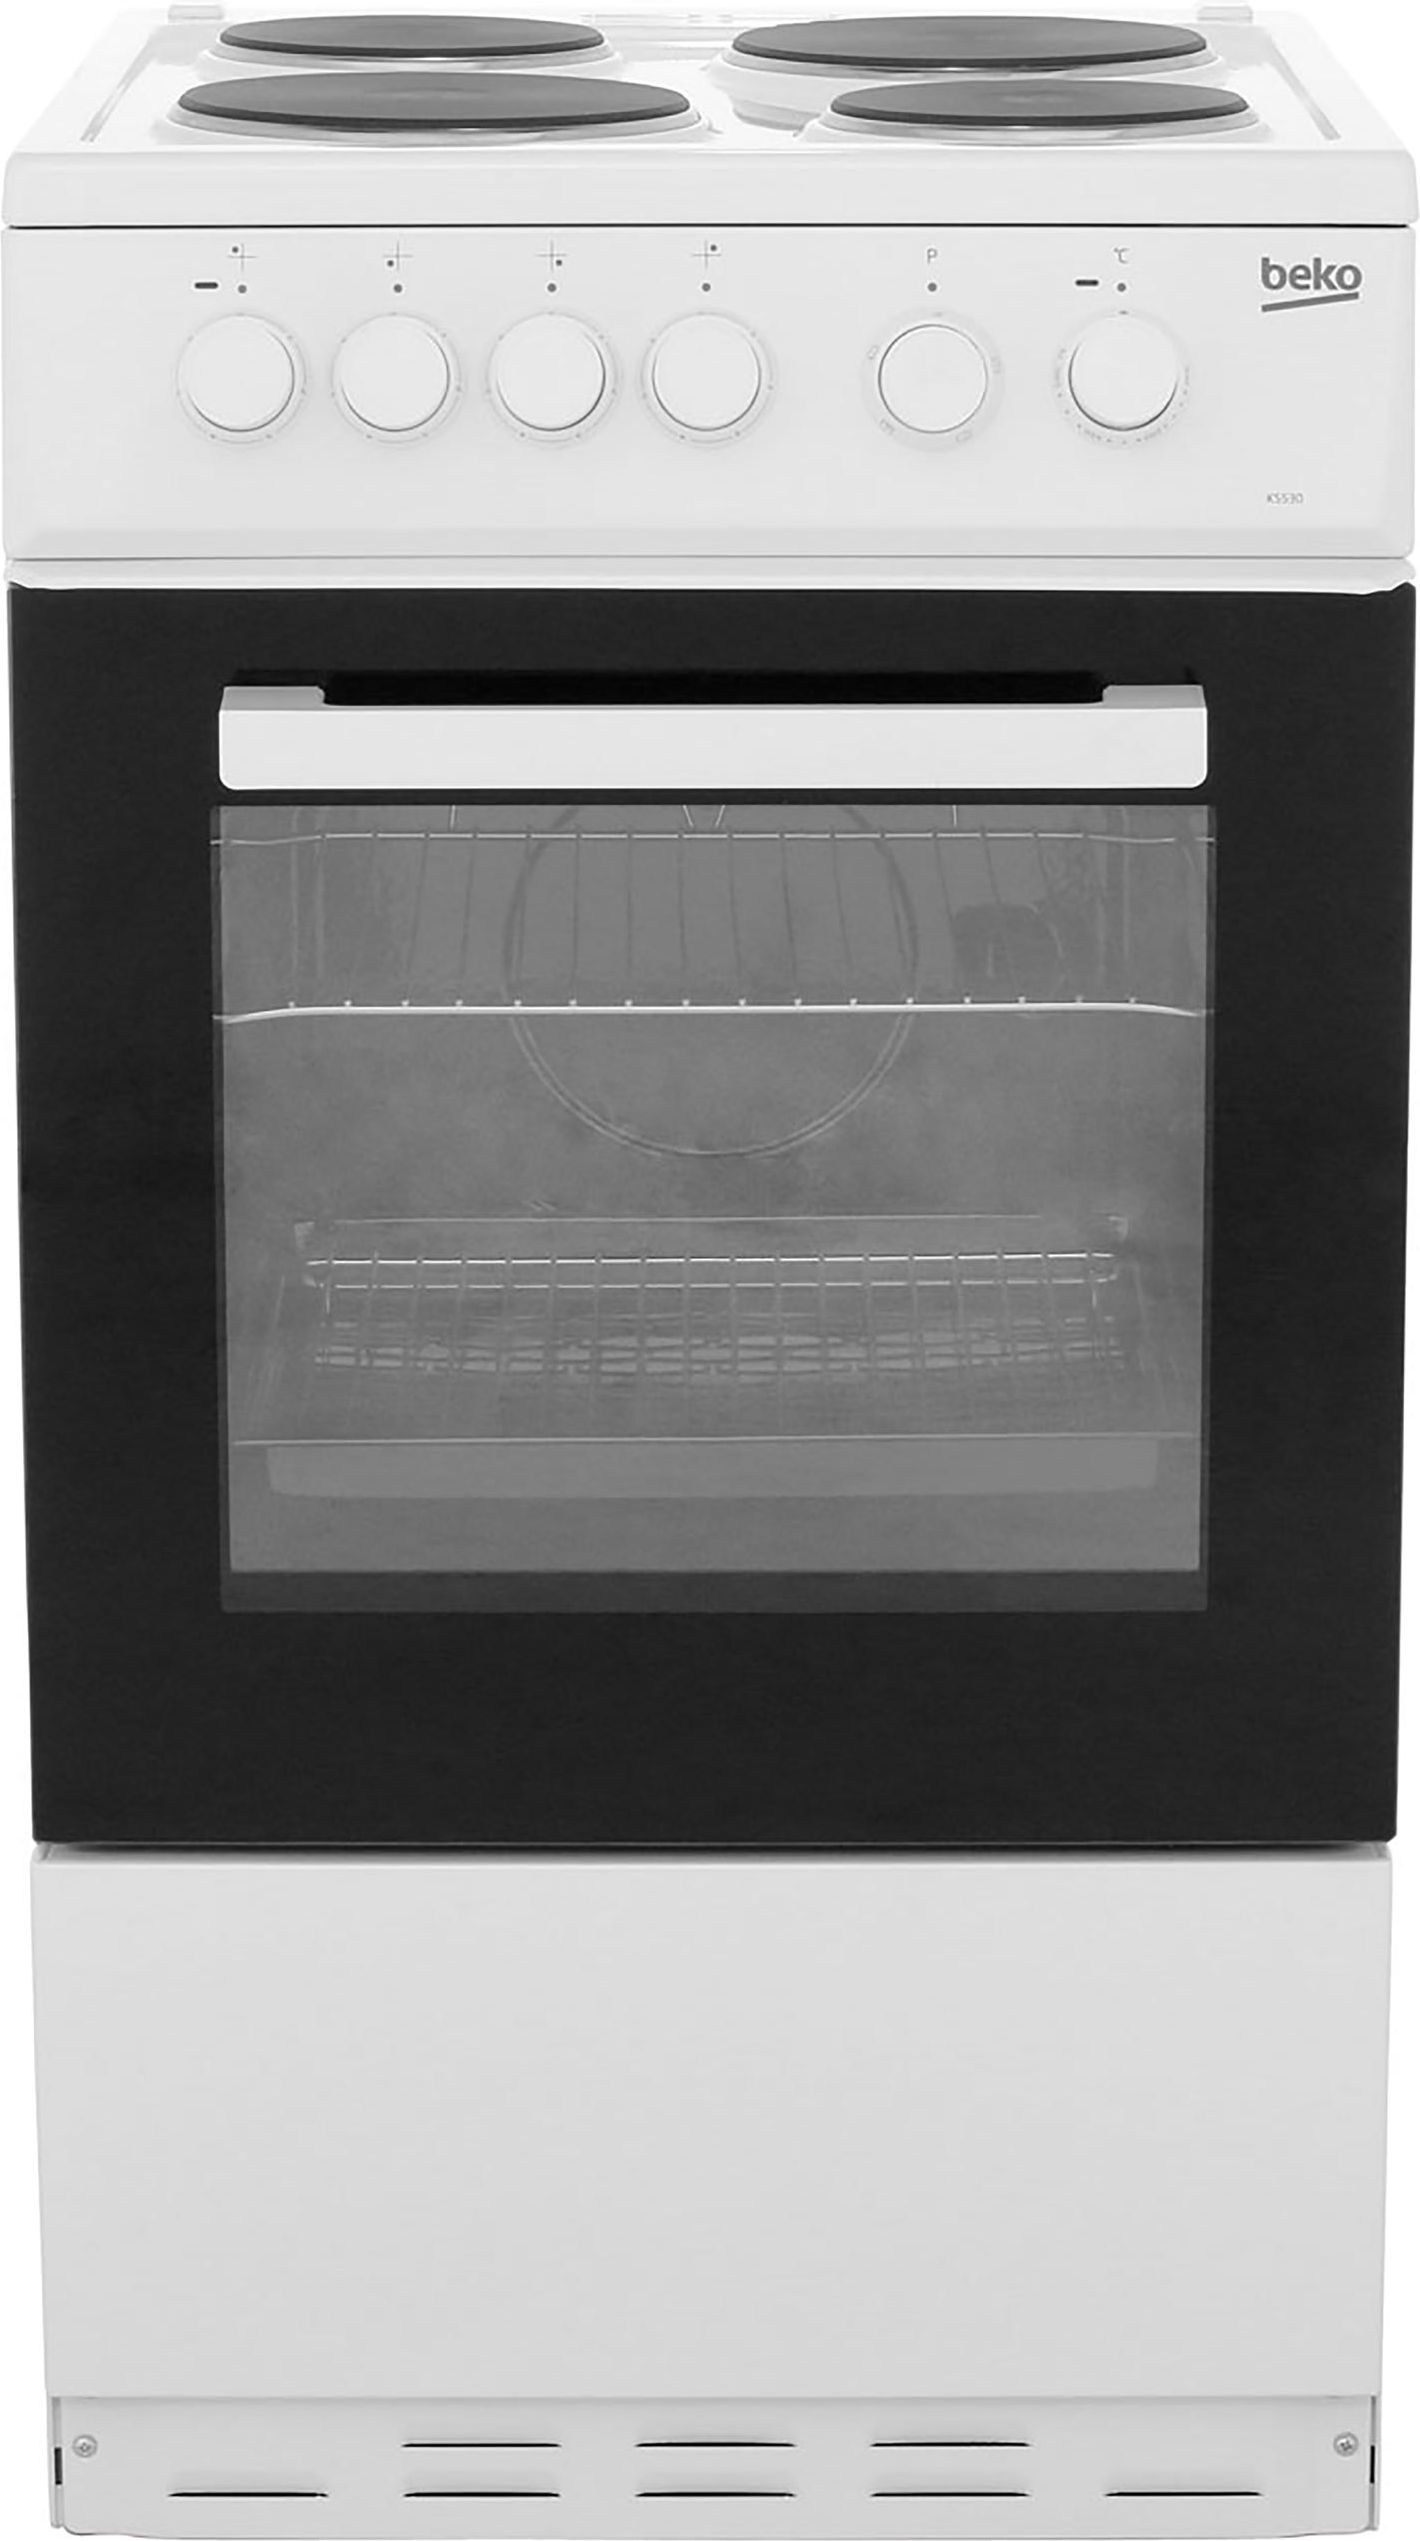 Beko KS530W 50cm Electric Cooker with Solid Plate Hob - White - A Rated, White